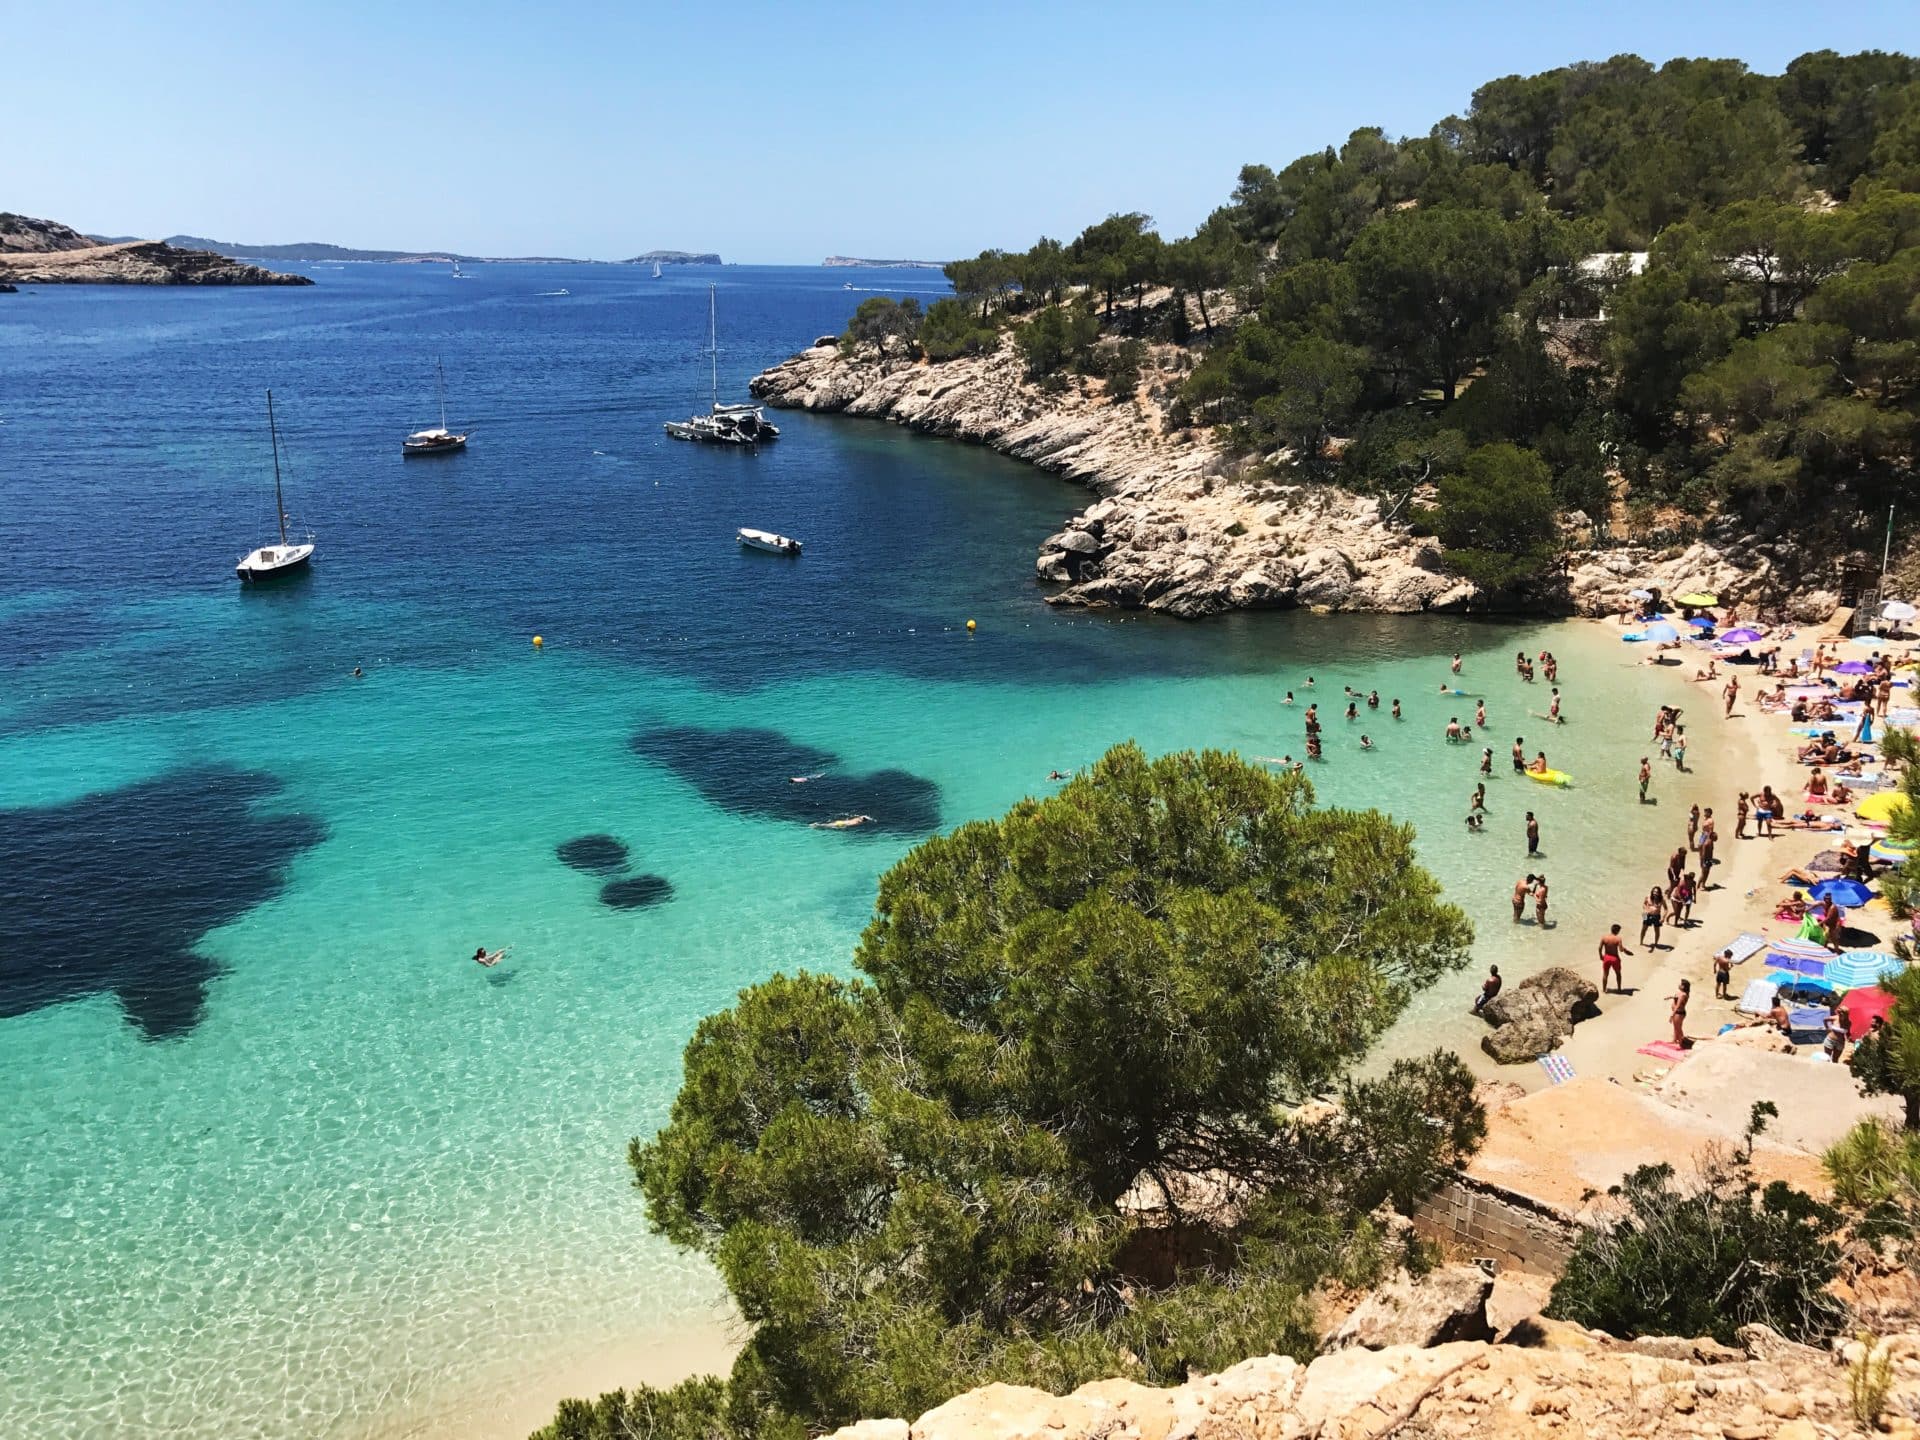 People On A Tropical Beach In Ibiza - The Best Free Stock Photos And Images